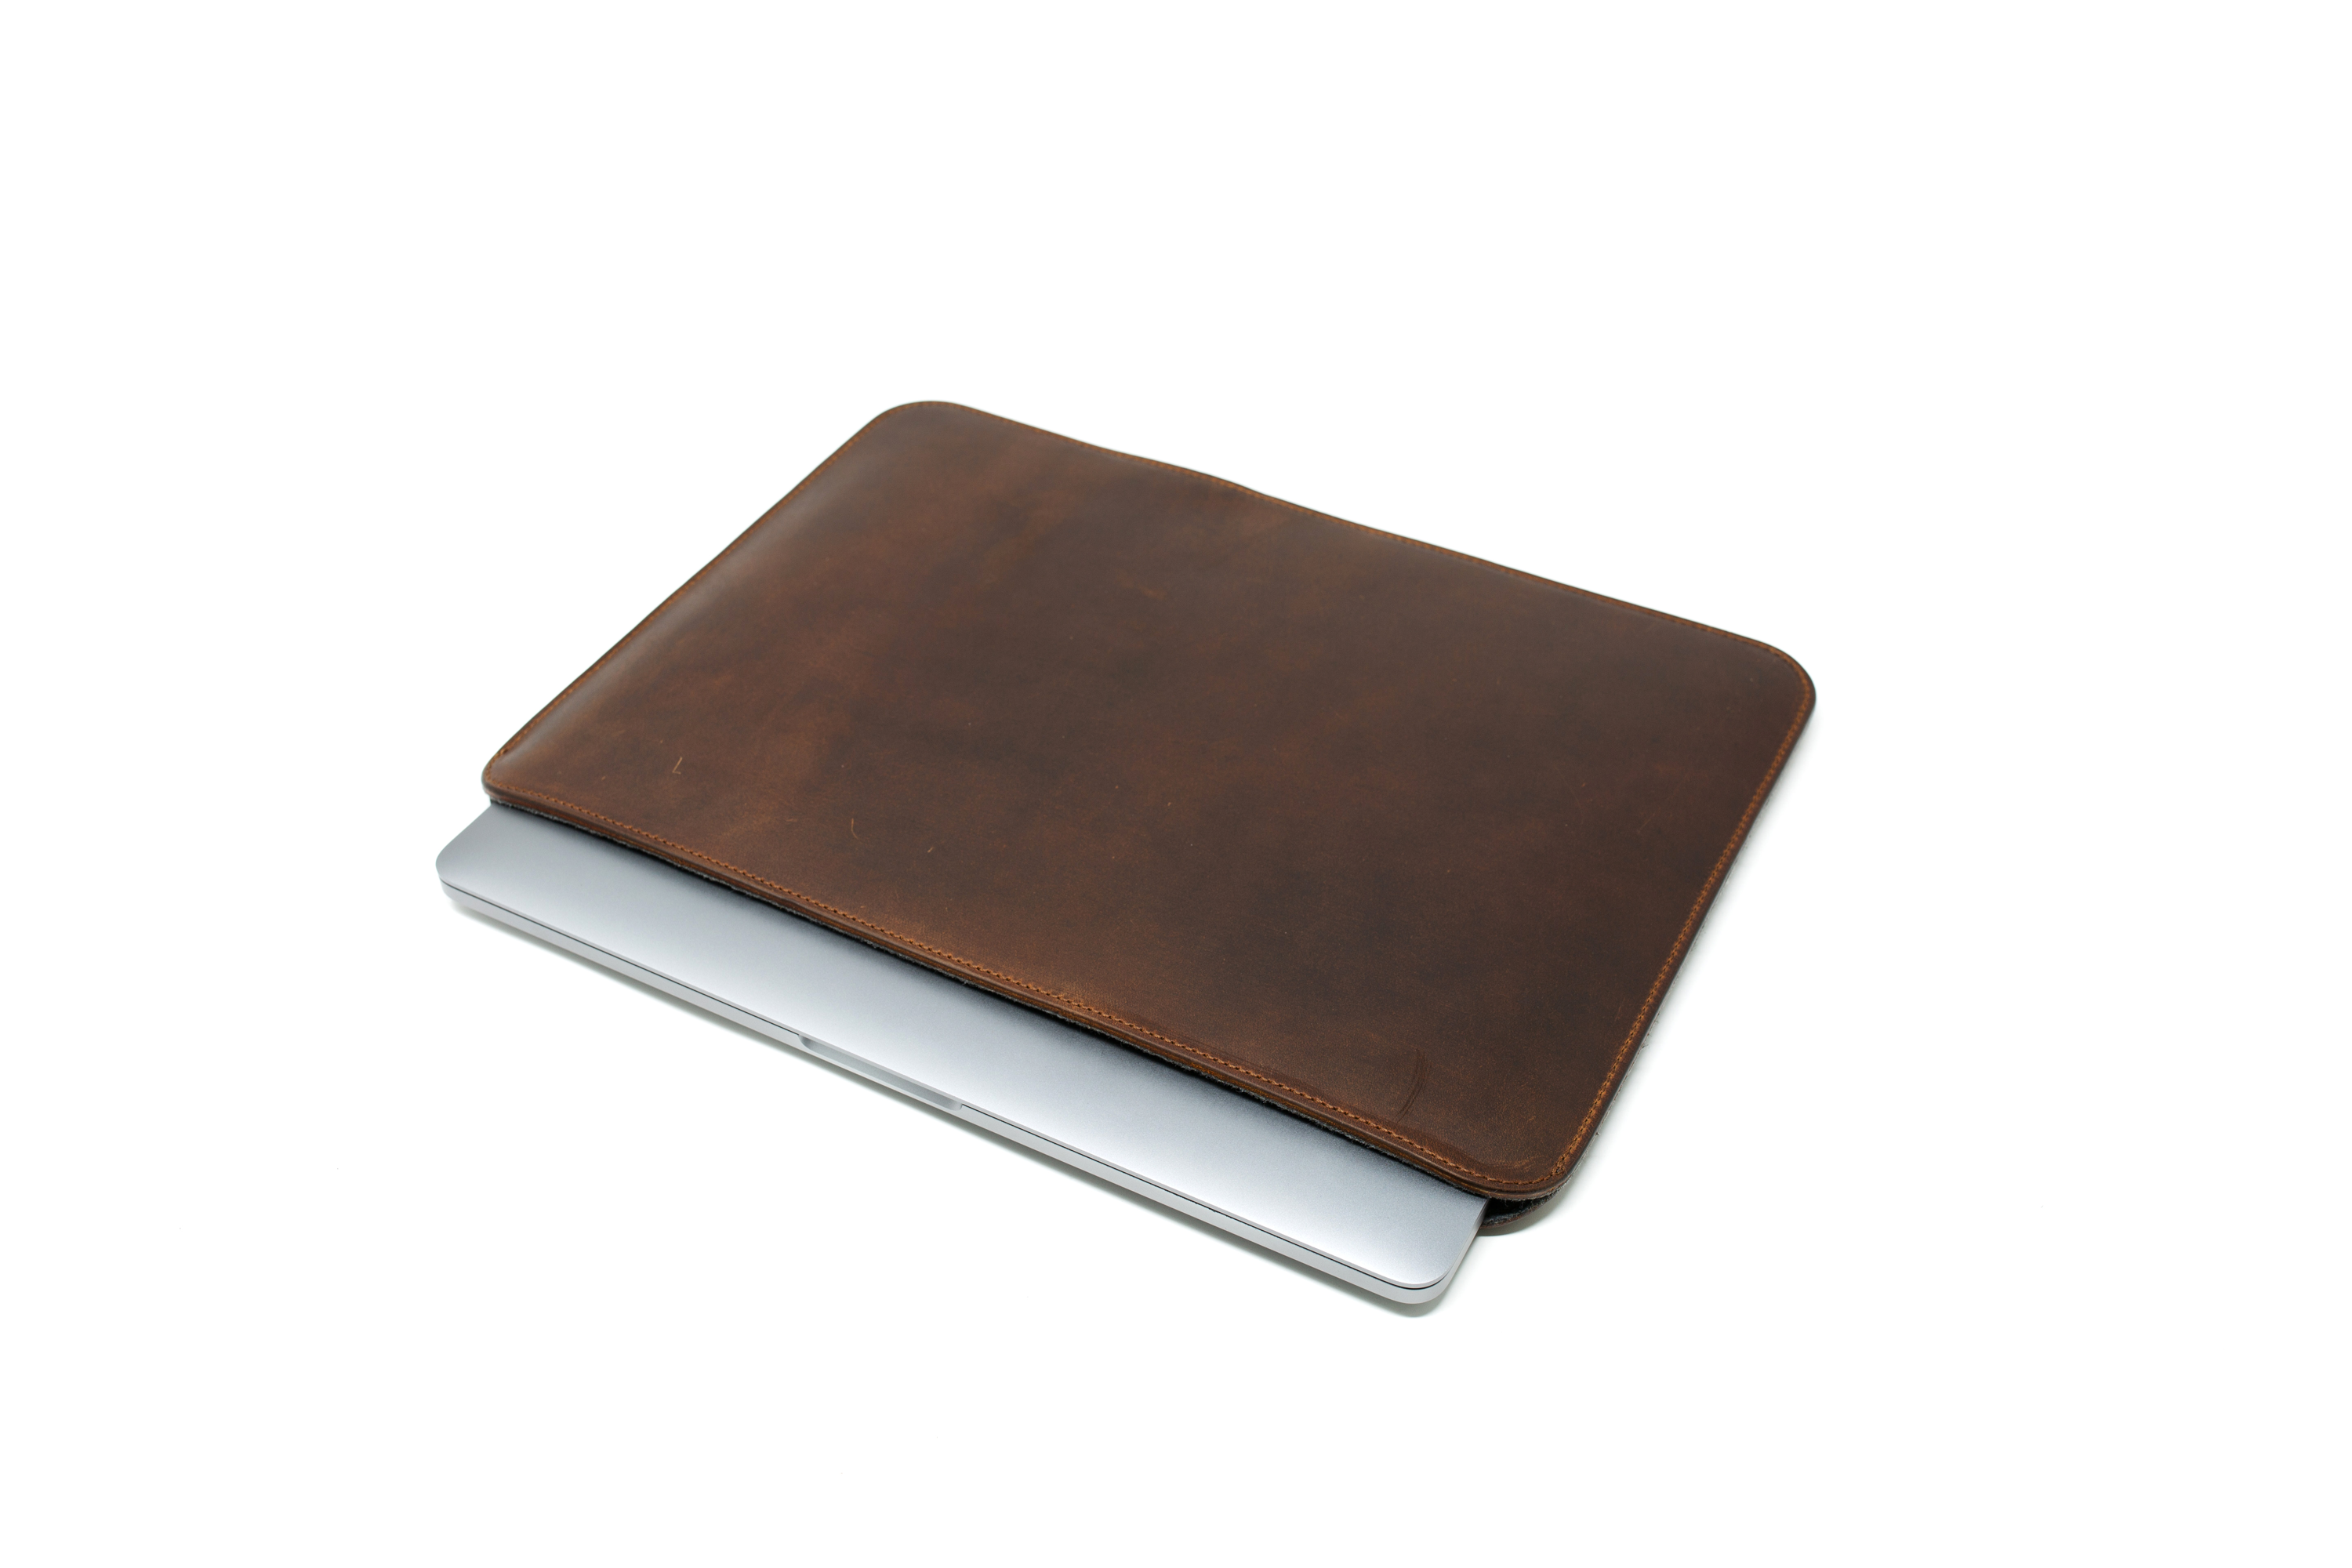 LEATHER MACBOOK SLEEVE WITH WOOL LINING - CHESTNUT